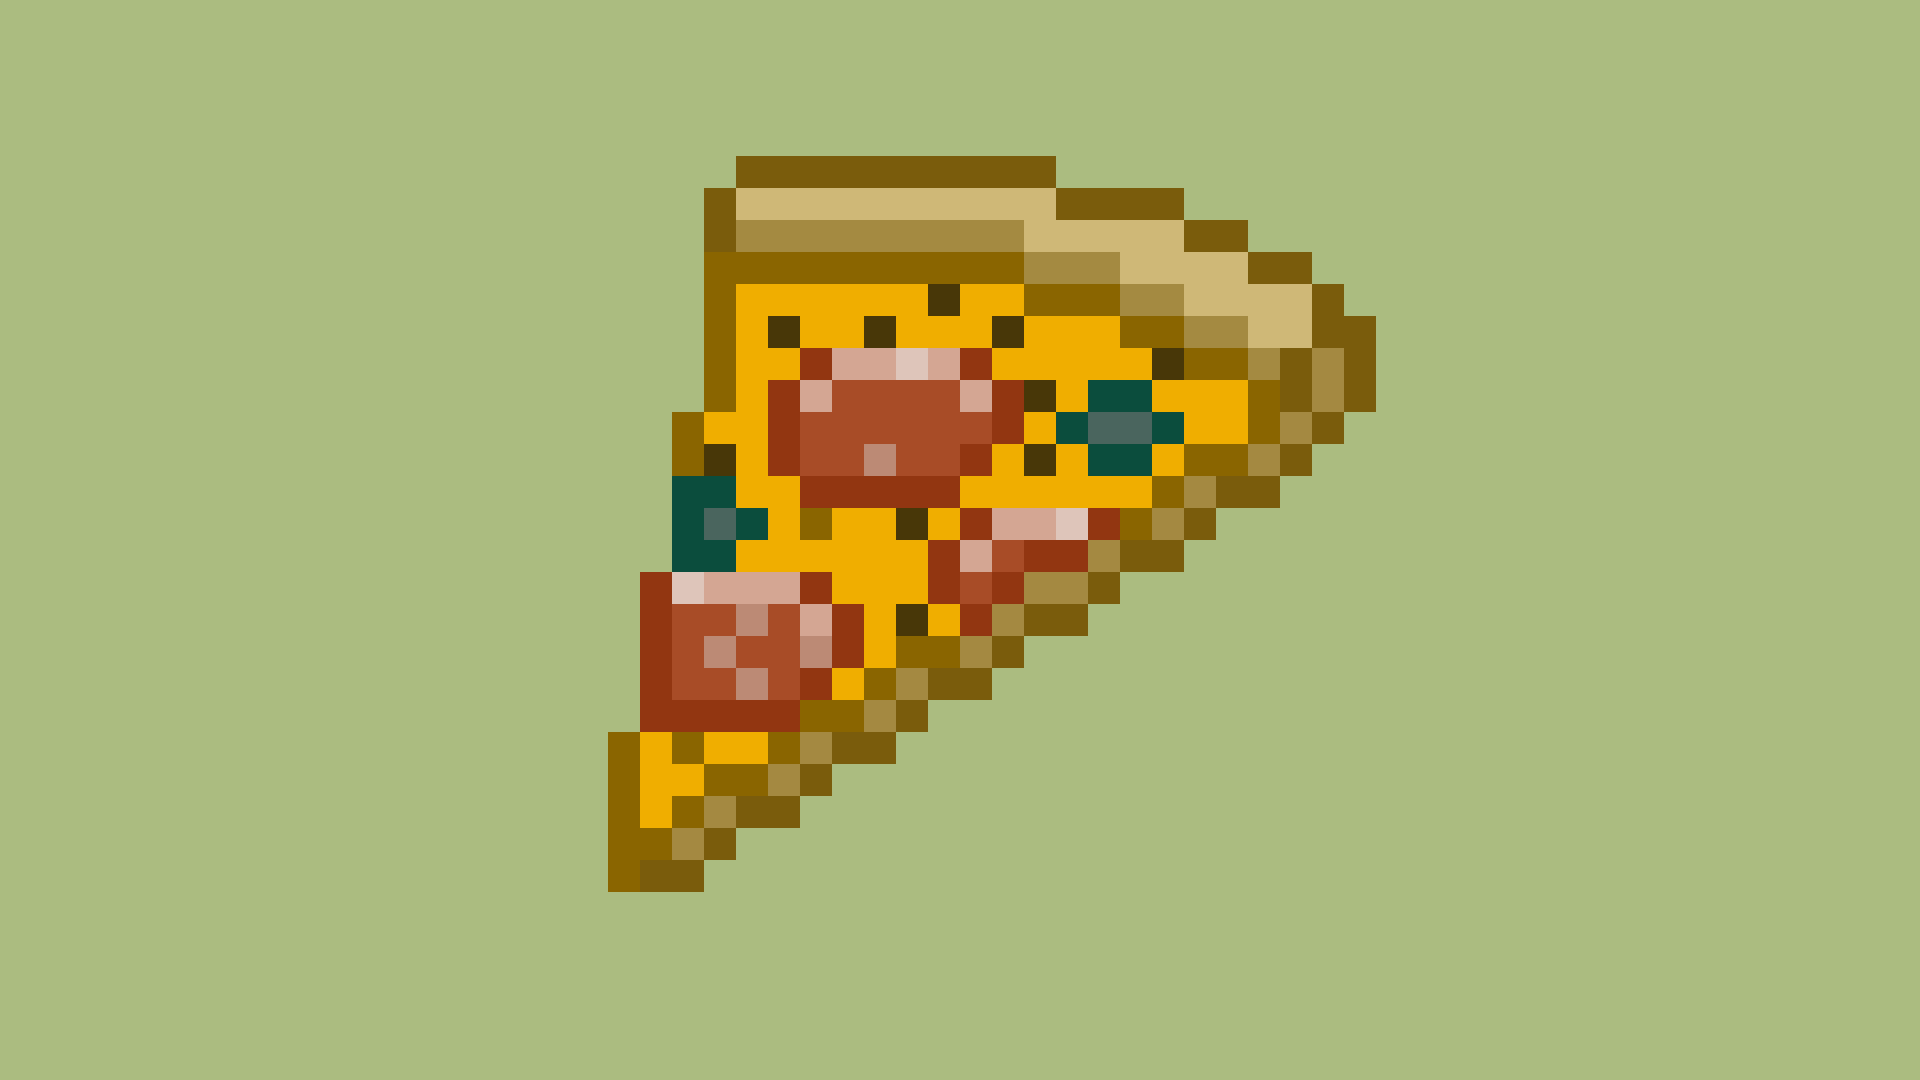 Icon for Pizza eater